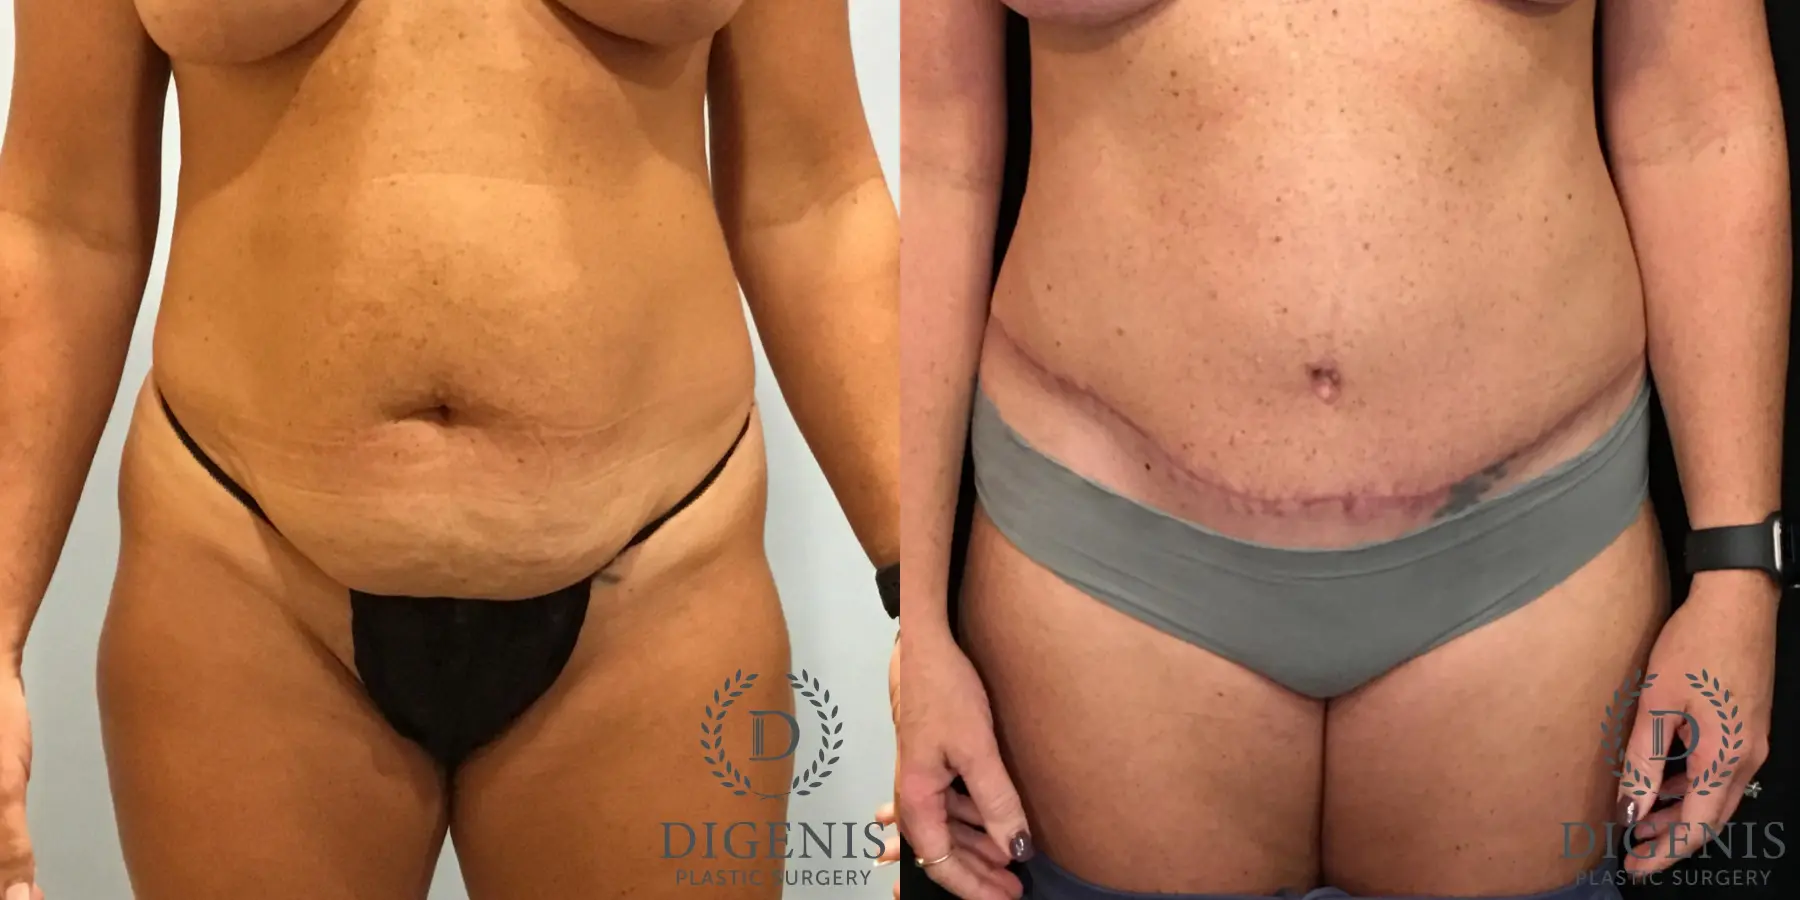 Abdominoplasty: Patient 4 - Before and After 1